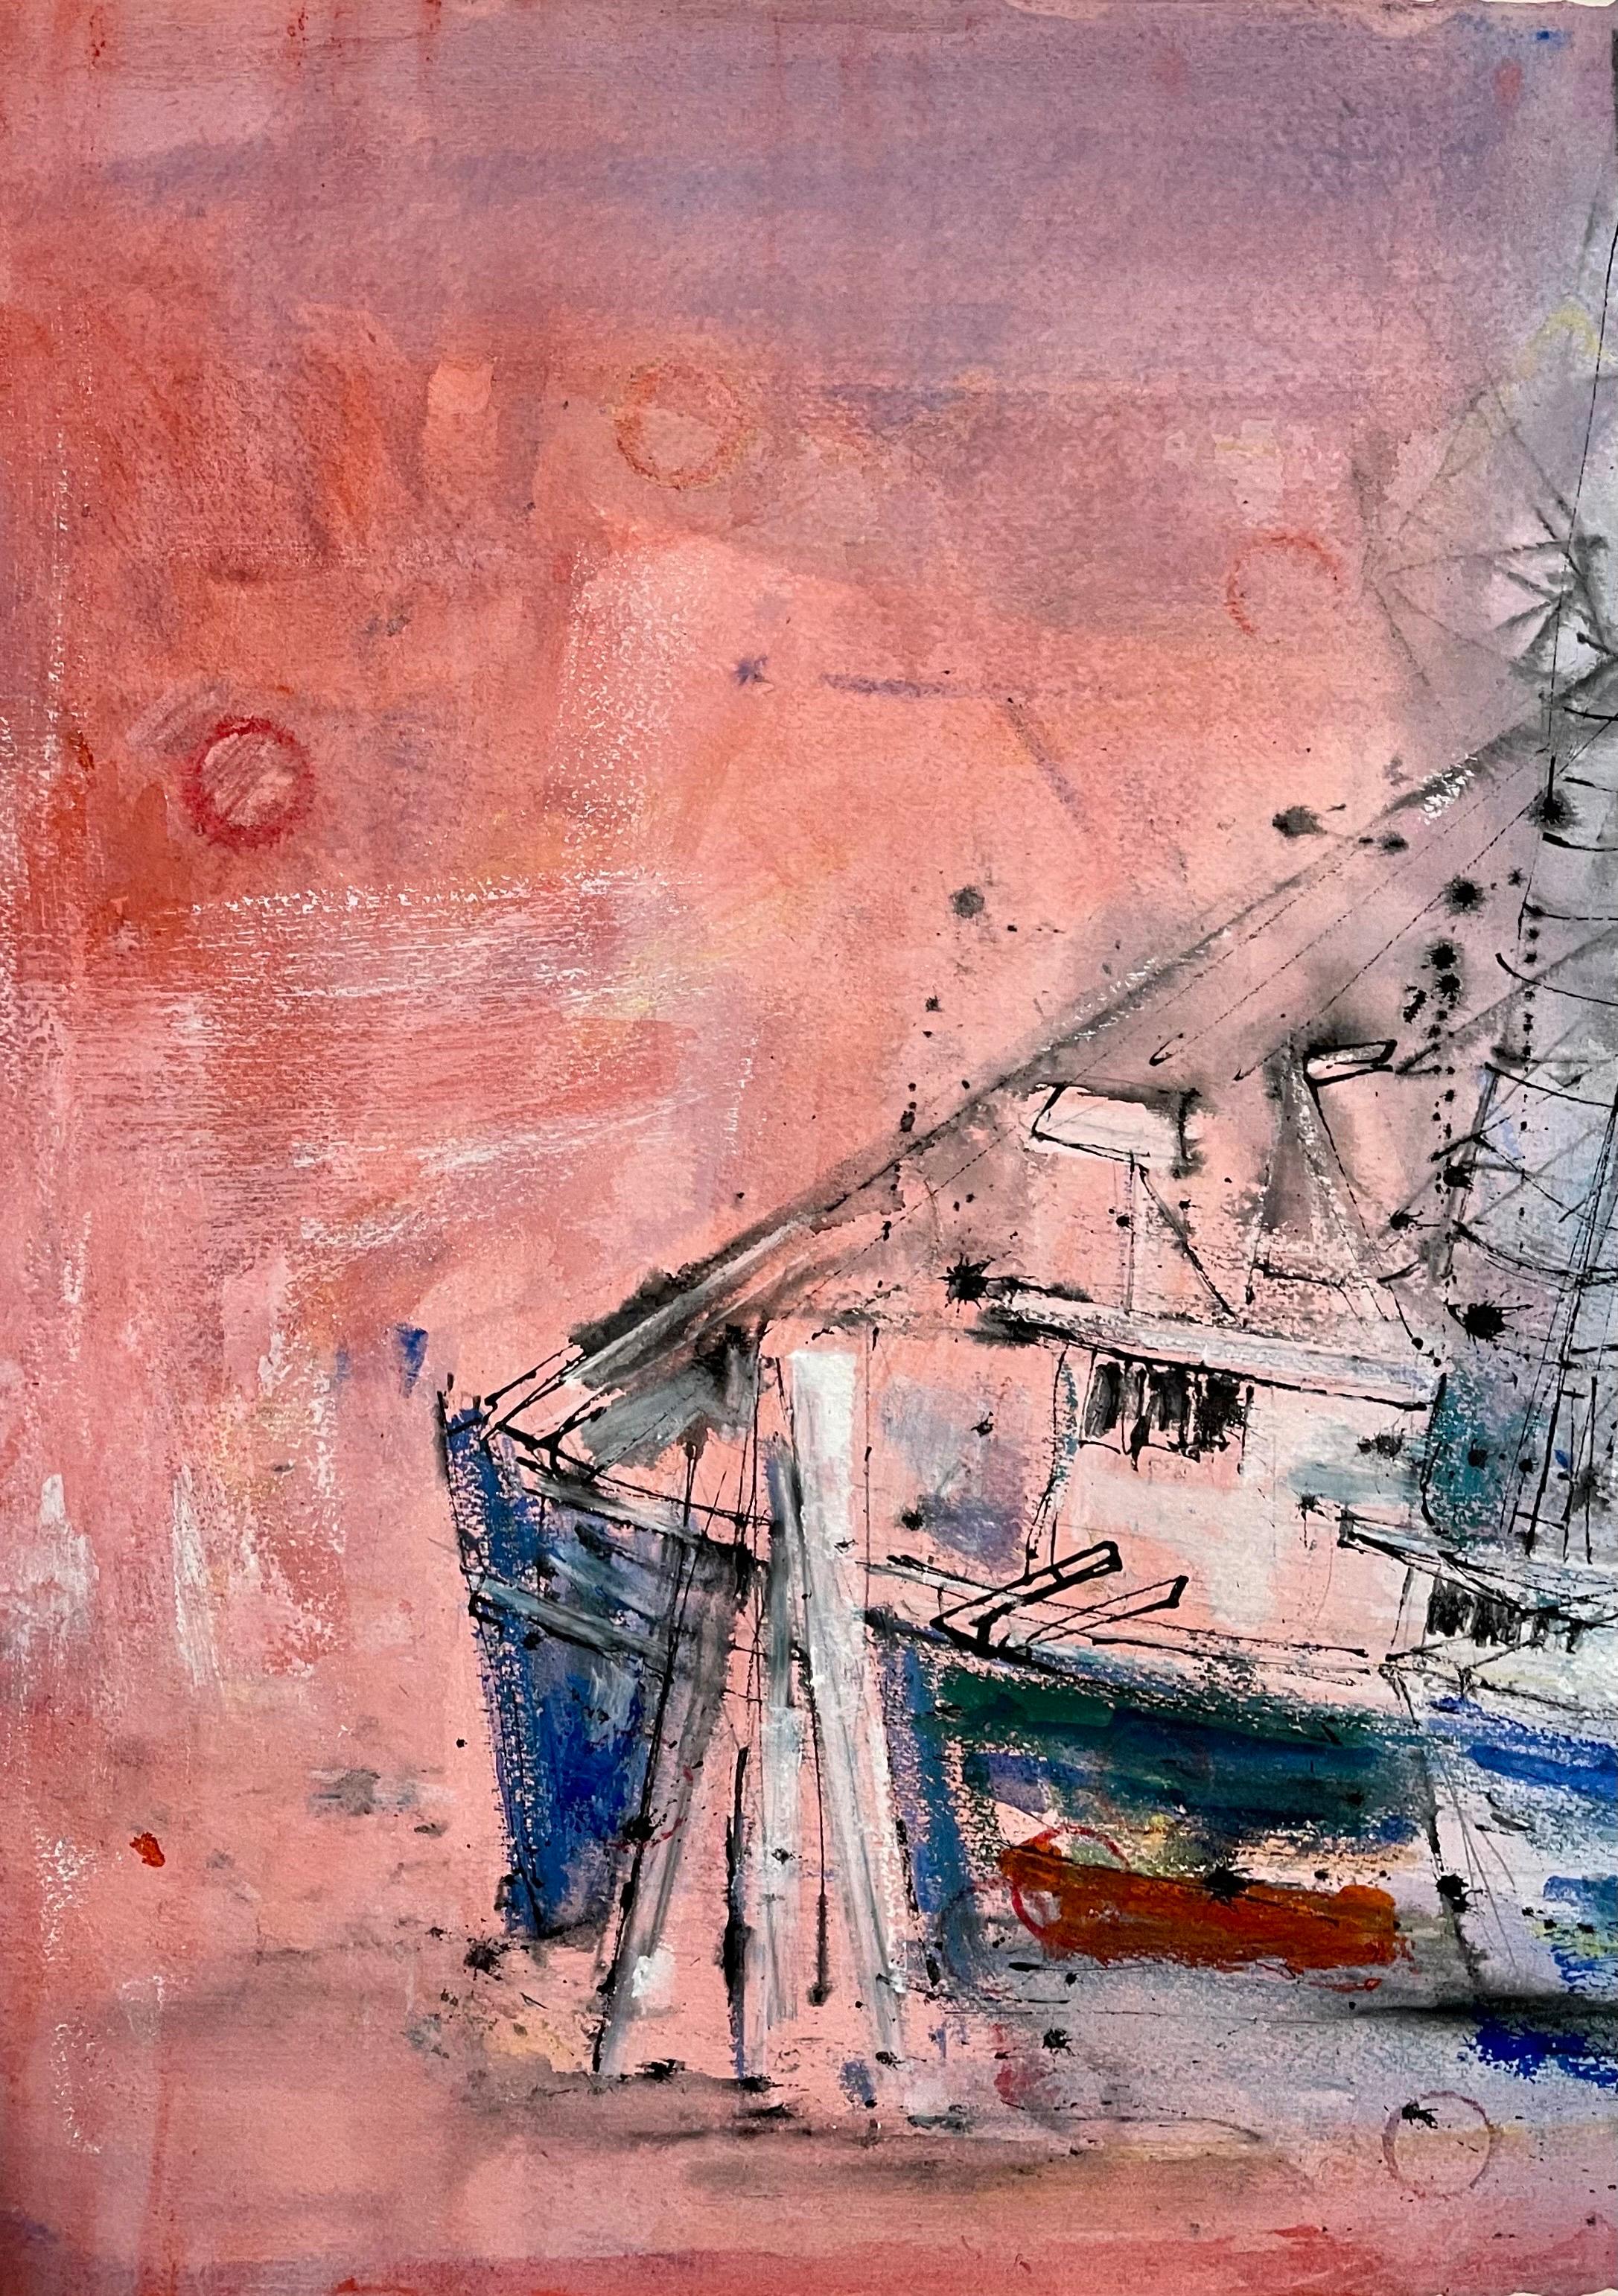 Abstract harbor scene with boats, in bold, vivid colors on heavy mould made paper. 
Hand signed and dated, 1980
22 X 30 not frame

Robert Freiman, deaf from birth, was born in March 1917 in New York City. He attended an oral program near his home